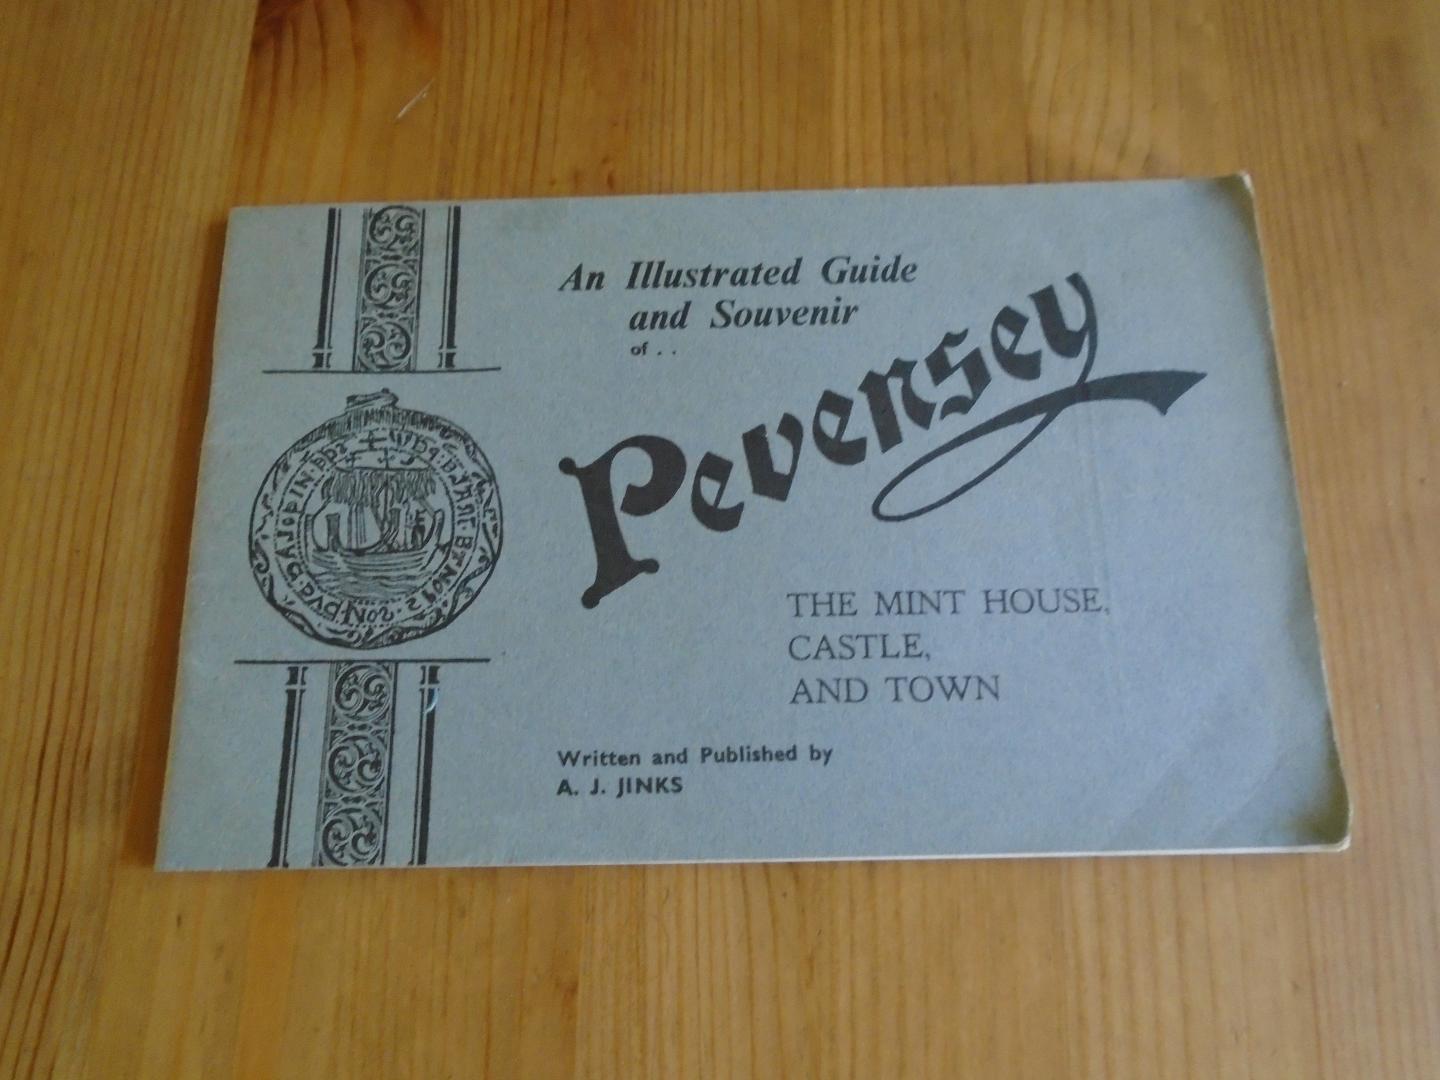 Jinks, A.J. - An Illustrated Guide and Souvenir of Pevensey. The Mint House, Castle, and Town